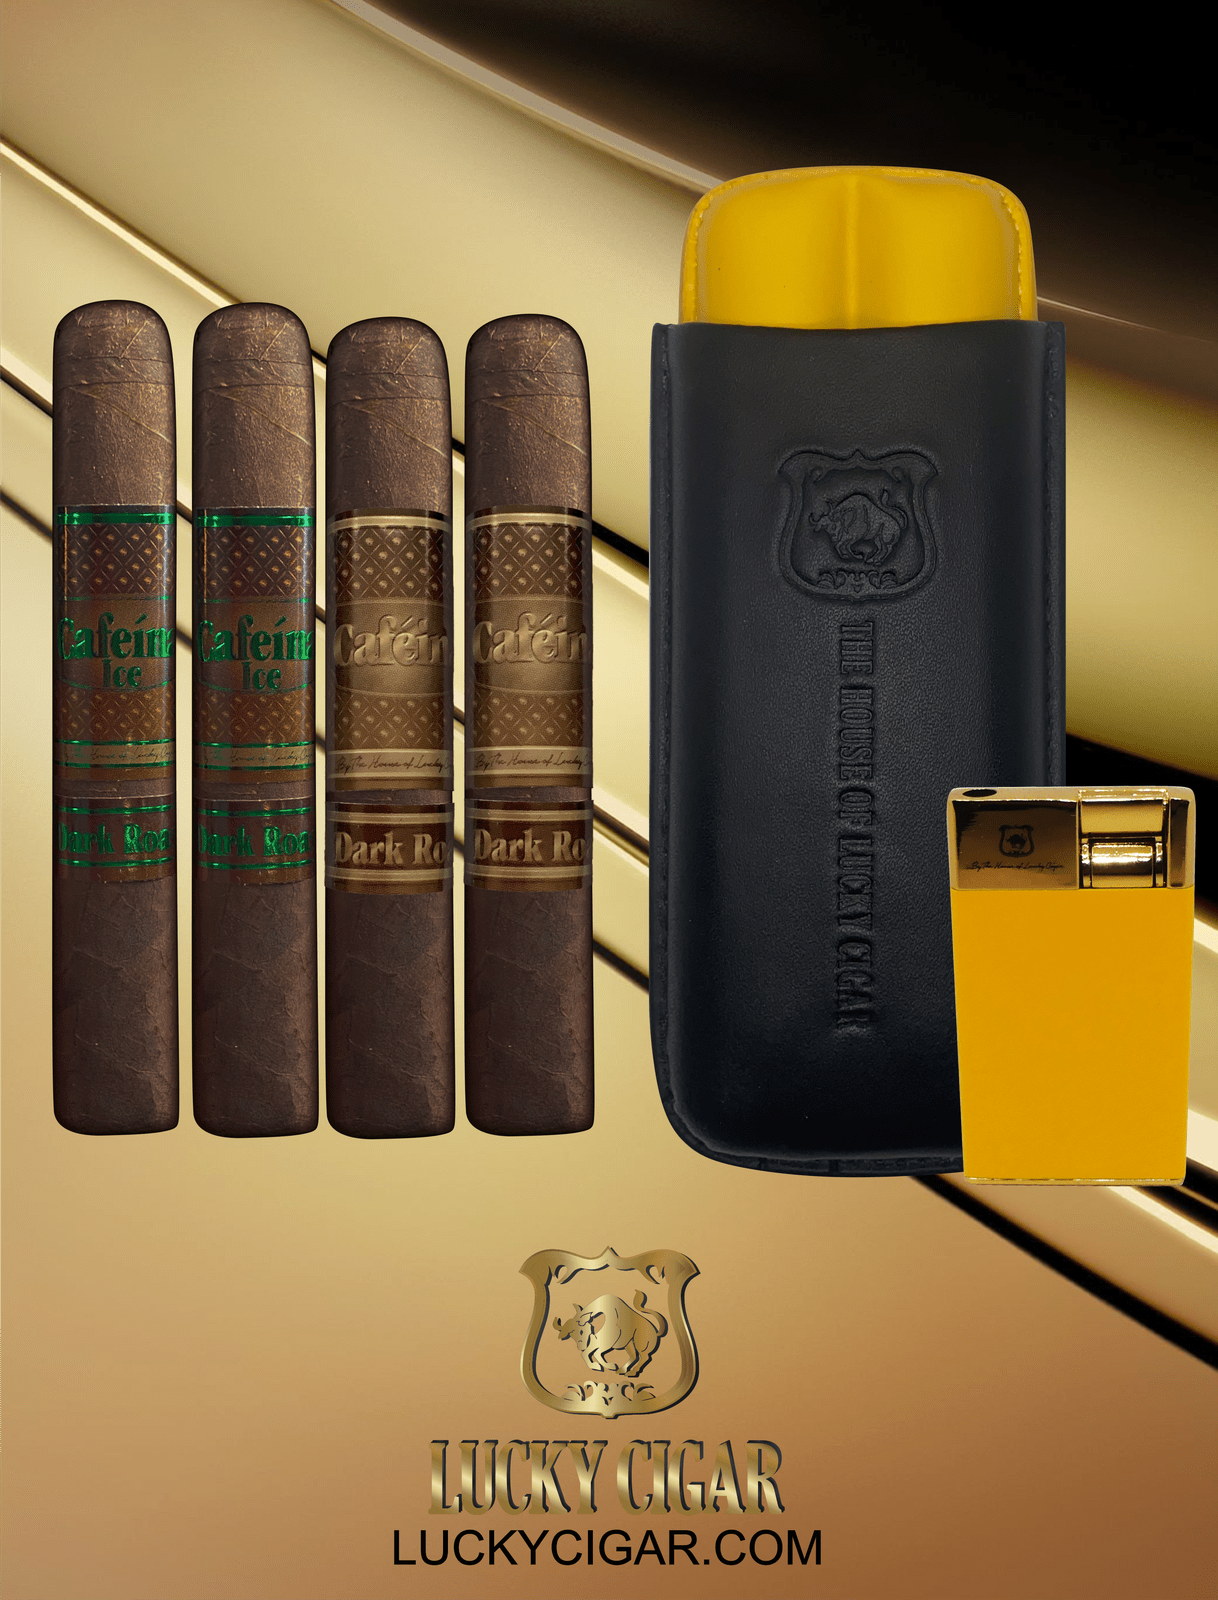 Lucky Cigar Sampler Sets: Set of 4 Cafeina Cigars with Torch, Travel Humidor Case